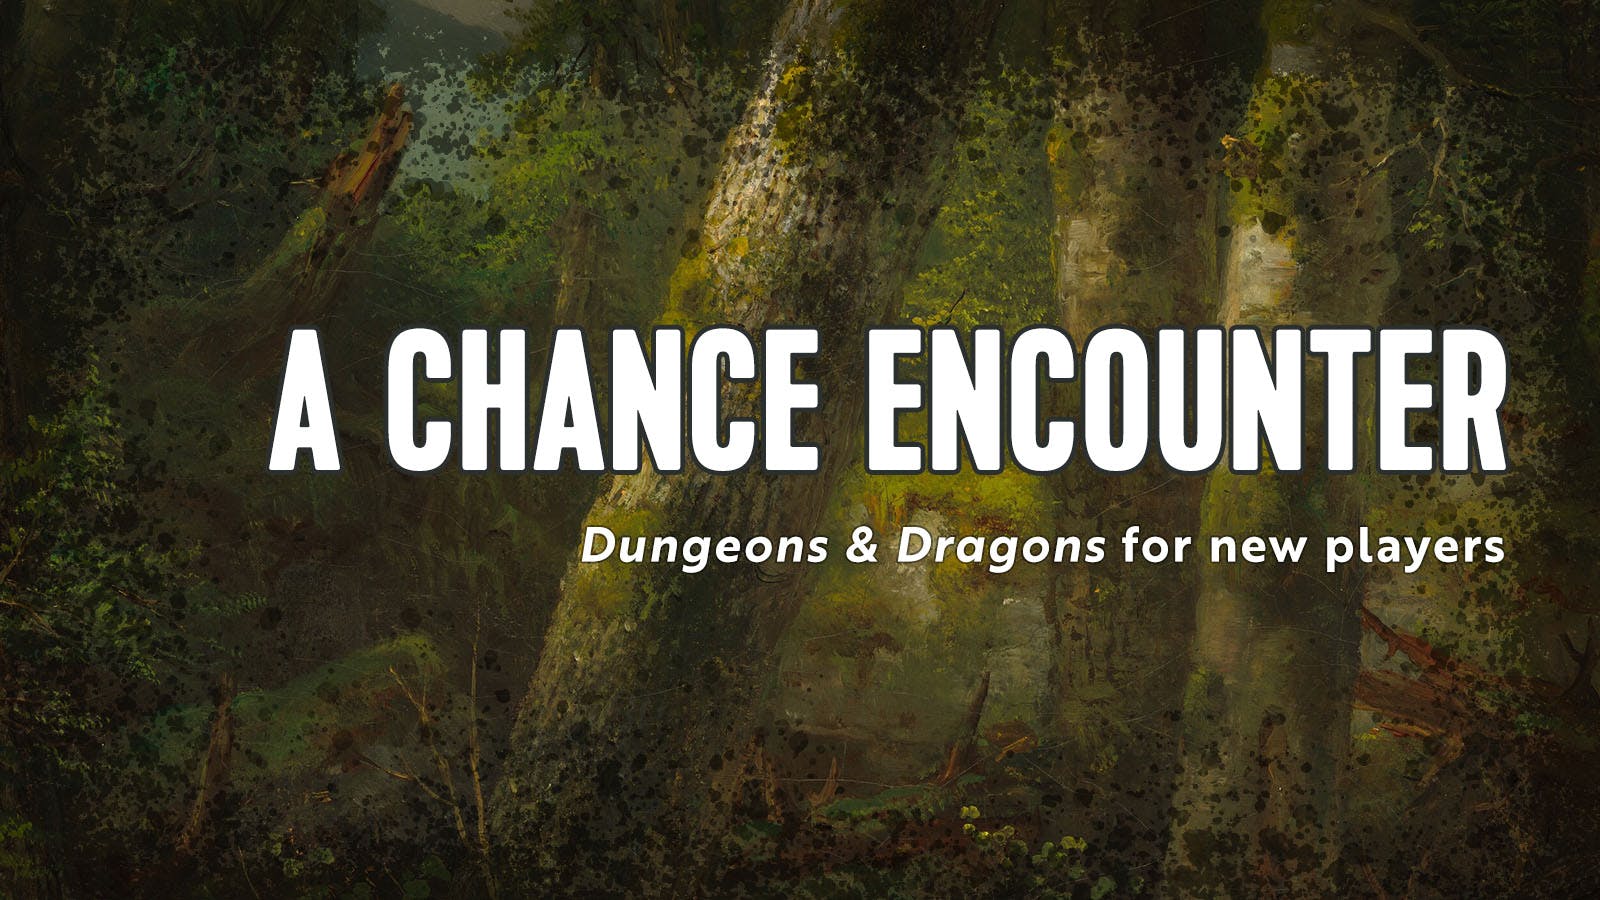 Dungeons & Dragons for Beginners | A Chance Encounter